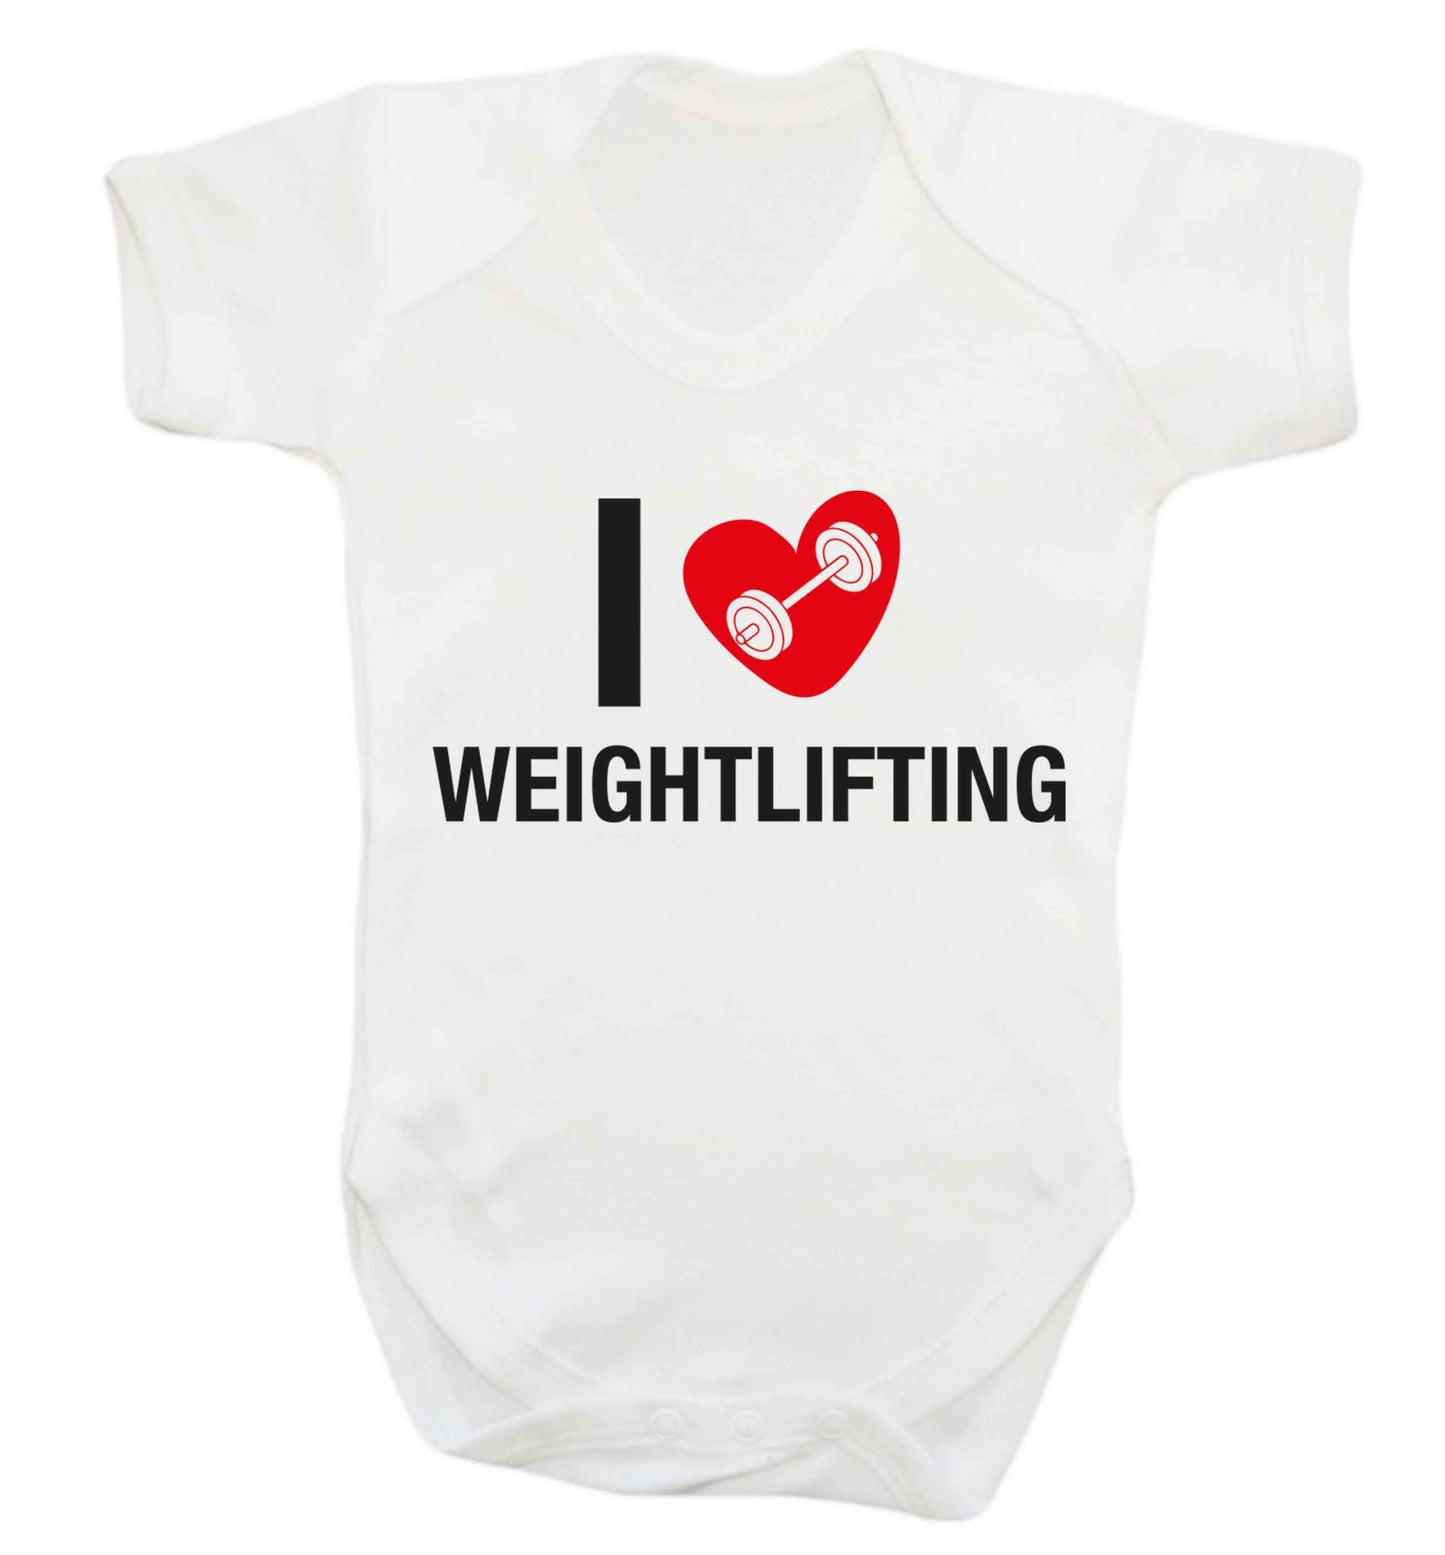 I love weightlifting Baby Vest white 18-24 months